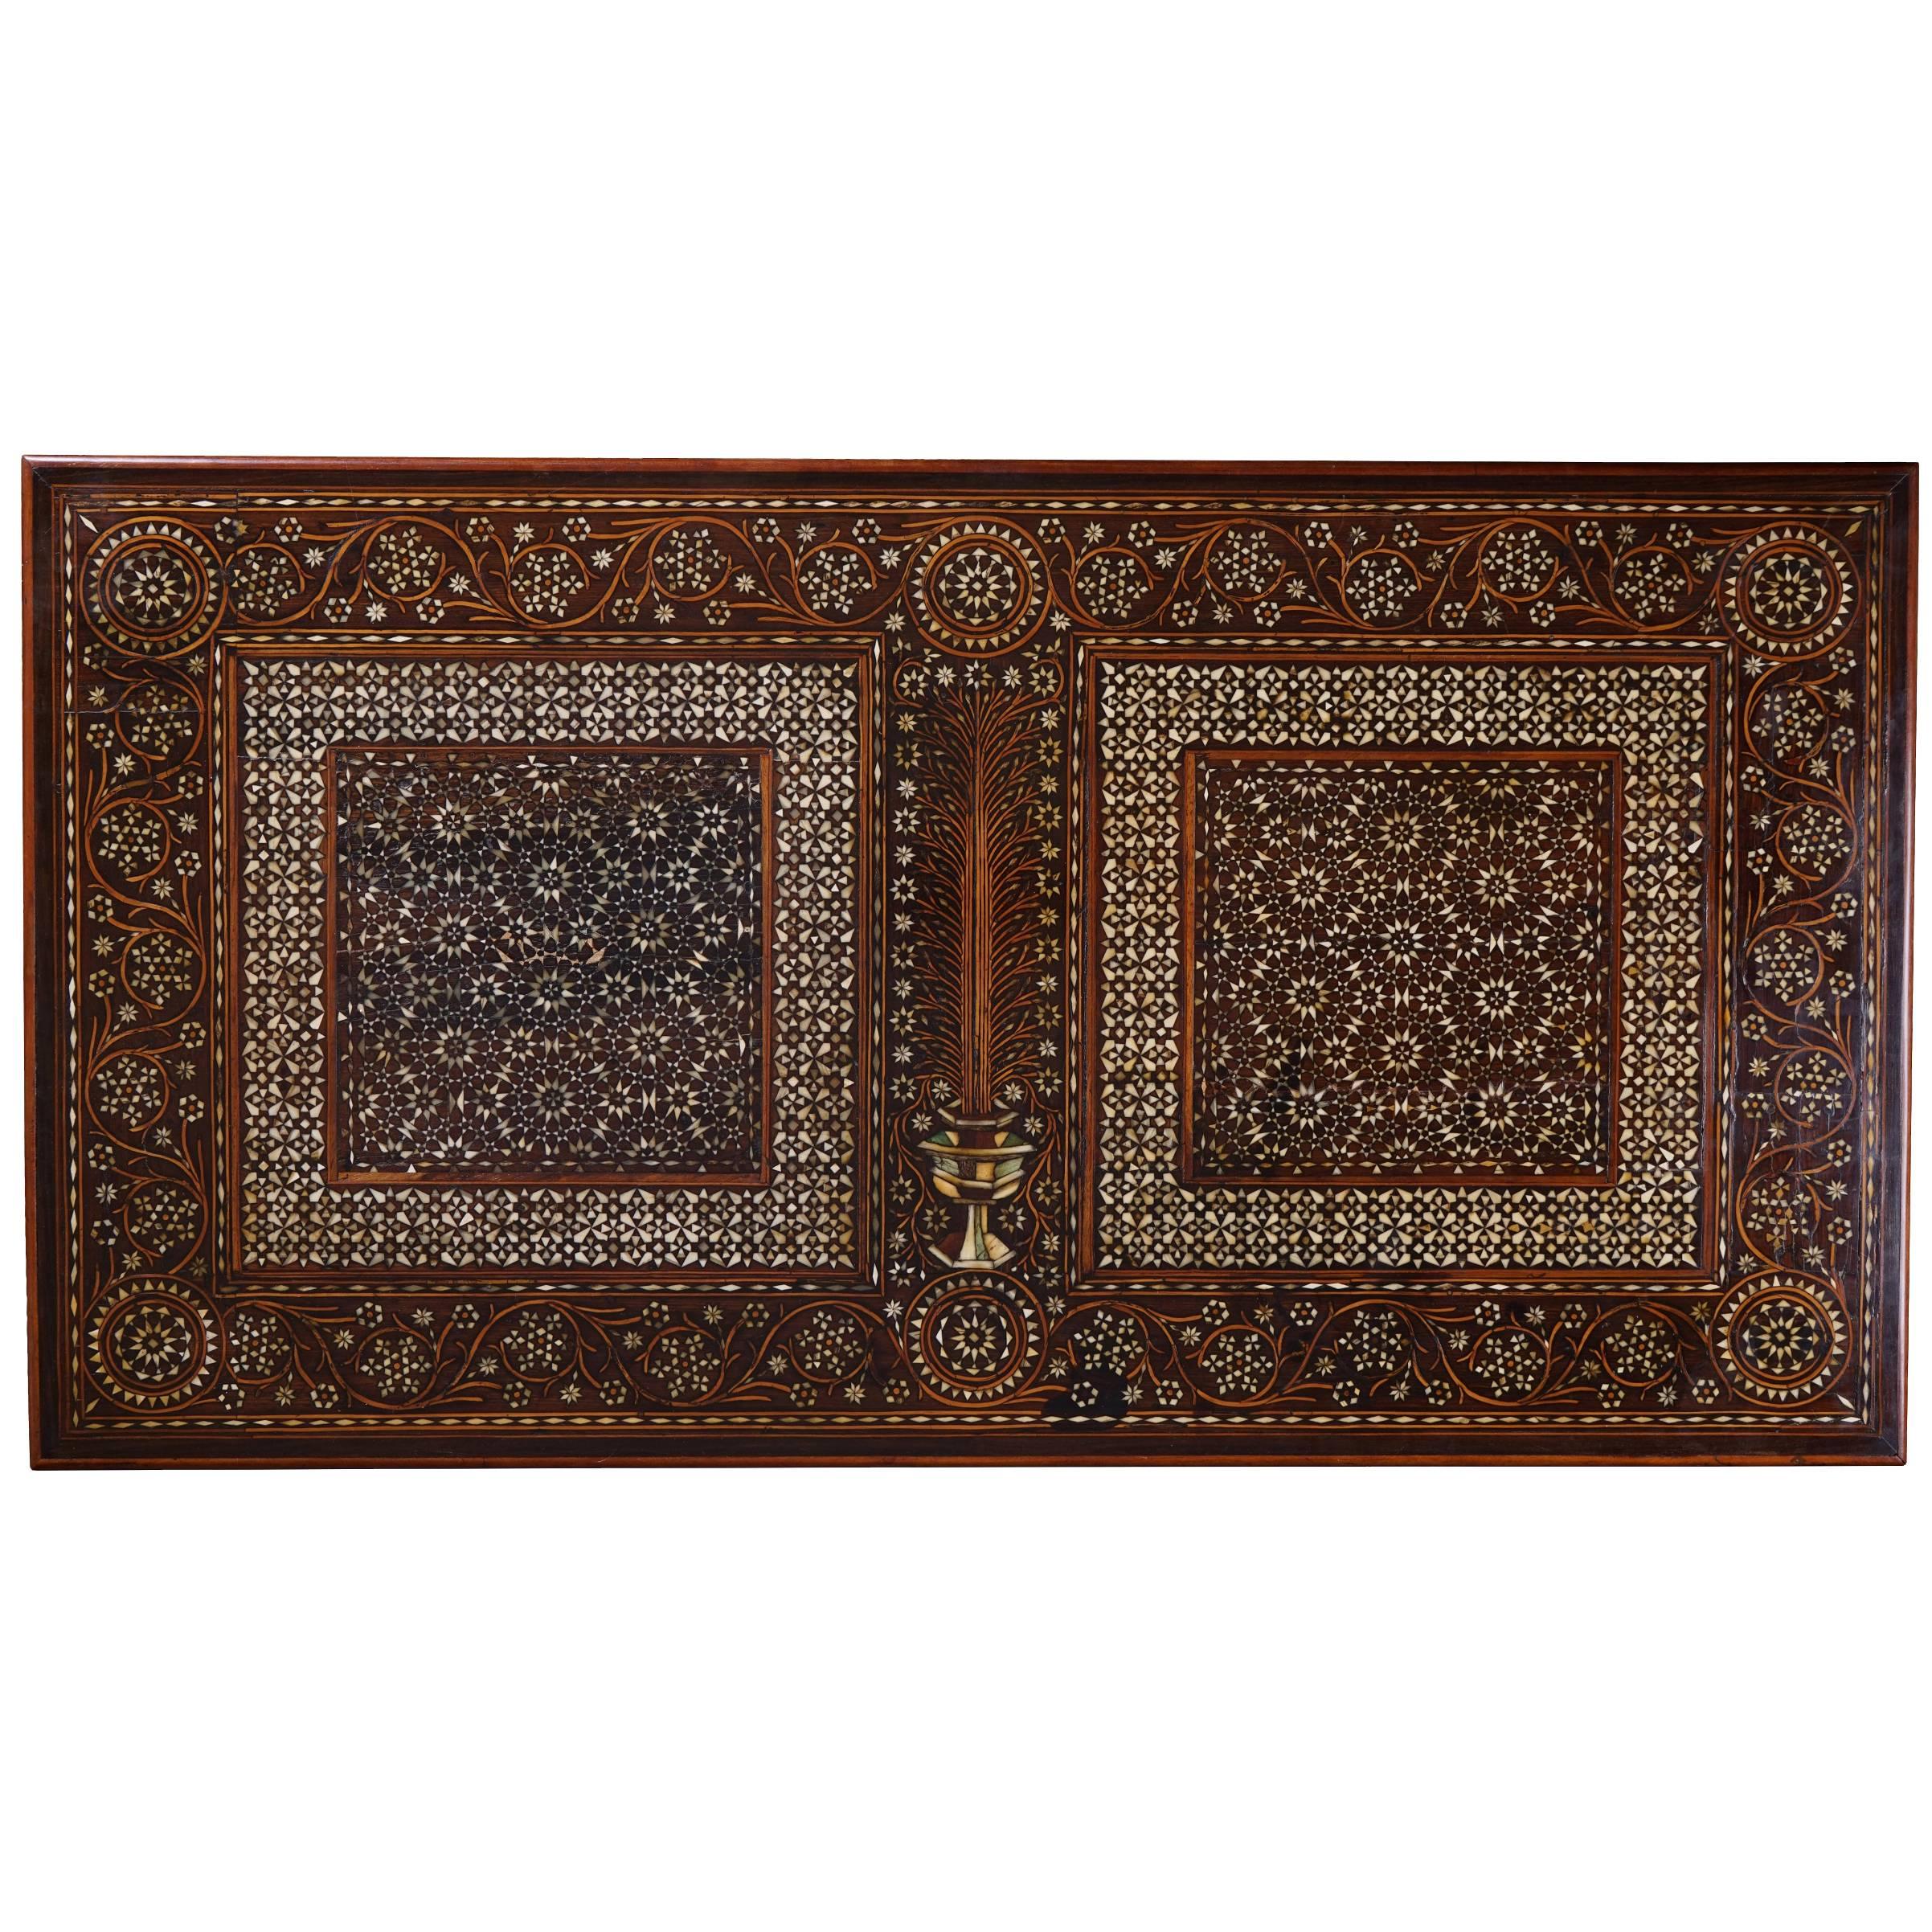 Collection label to the underside for M. G. Pallain

With a single drawer to the frieze and gilt metal stays, this beautiful table has been constructed in the 19th century cleverly utilising all the marquetry from a certosina coffer circa 1500.  